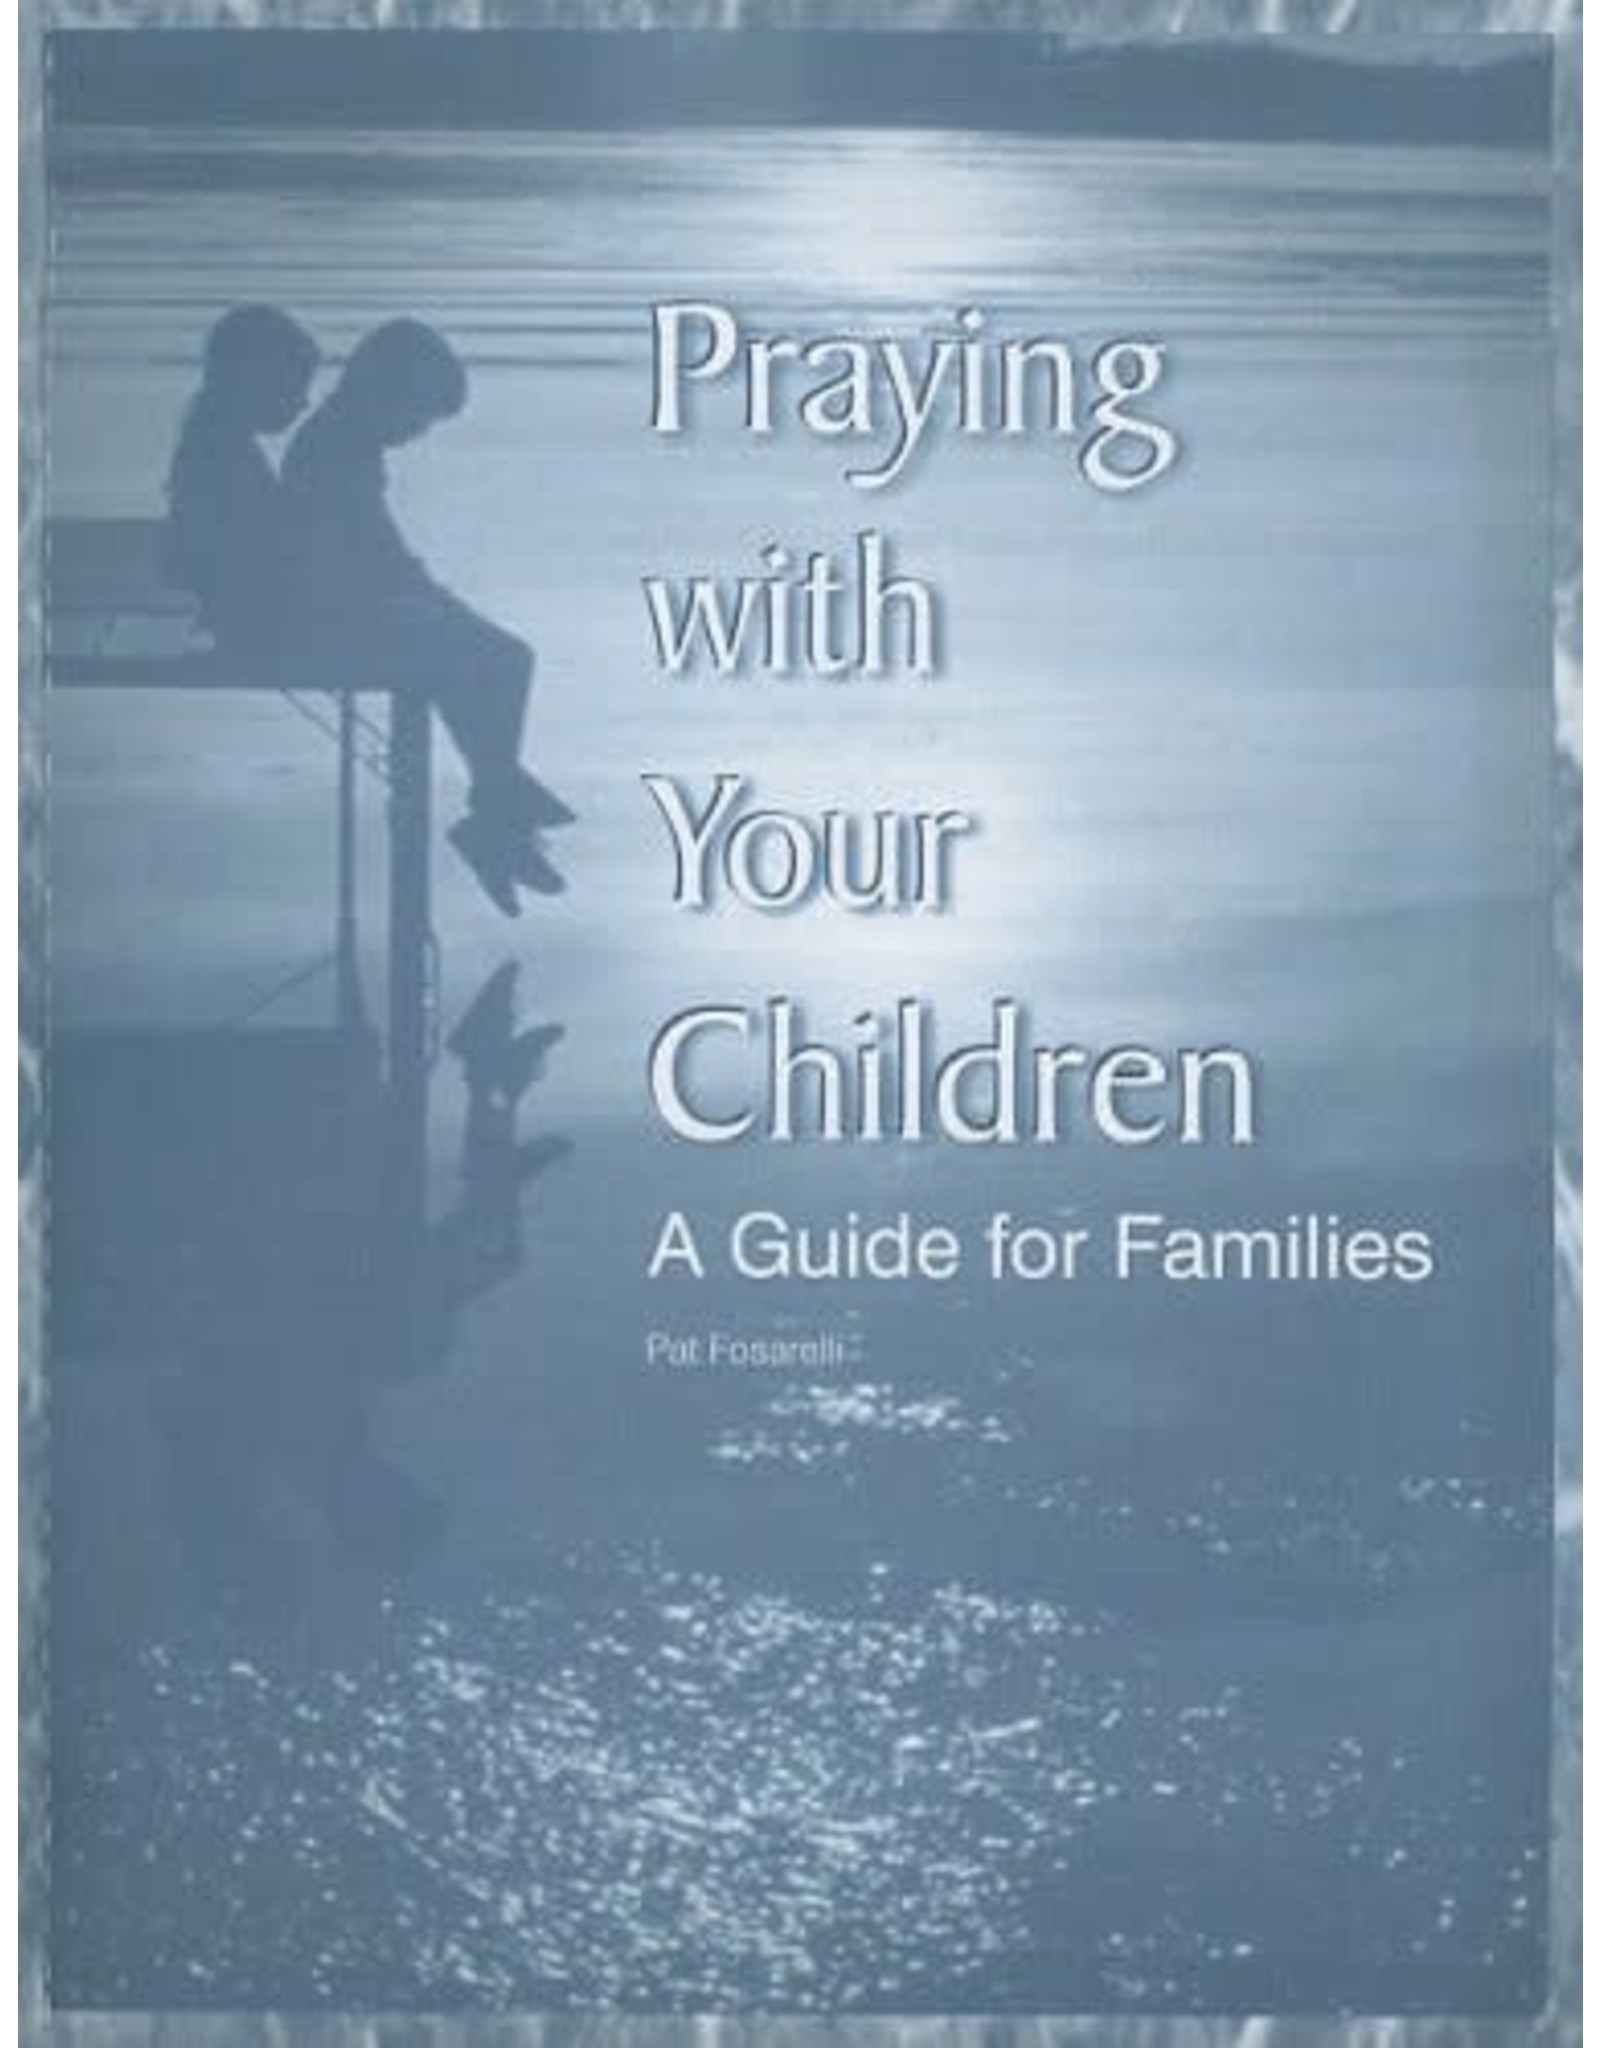 Praying with Your Children